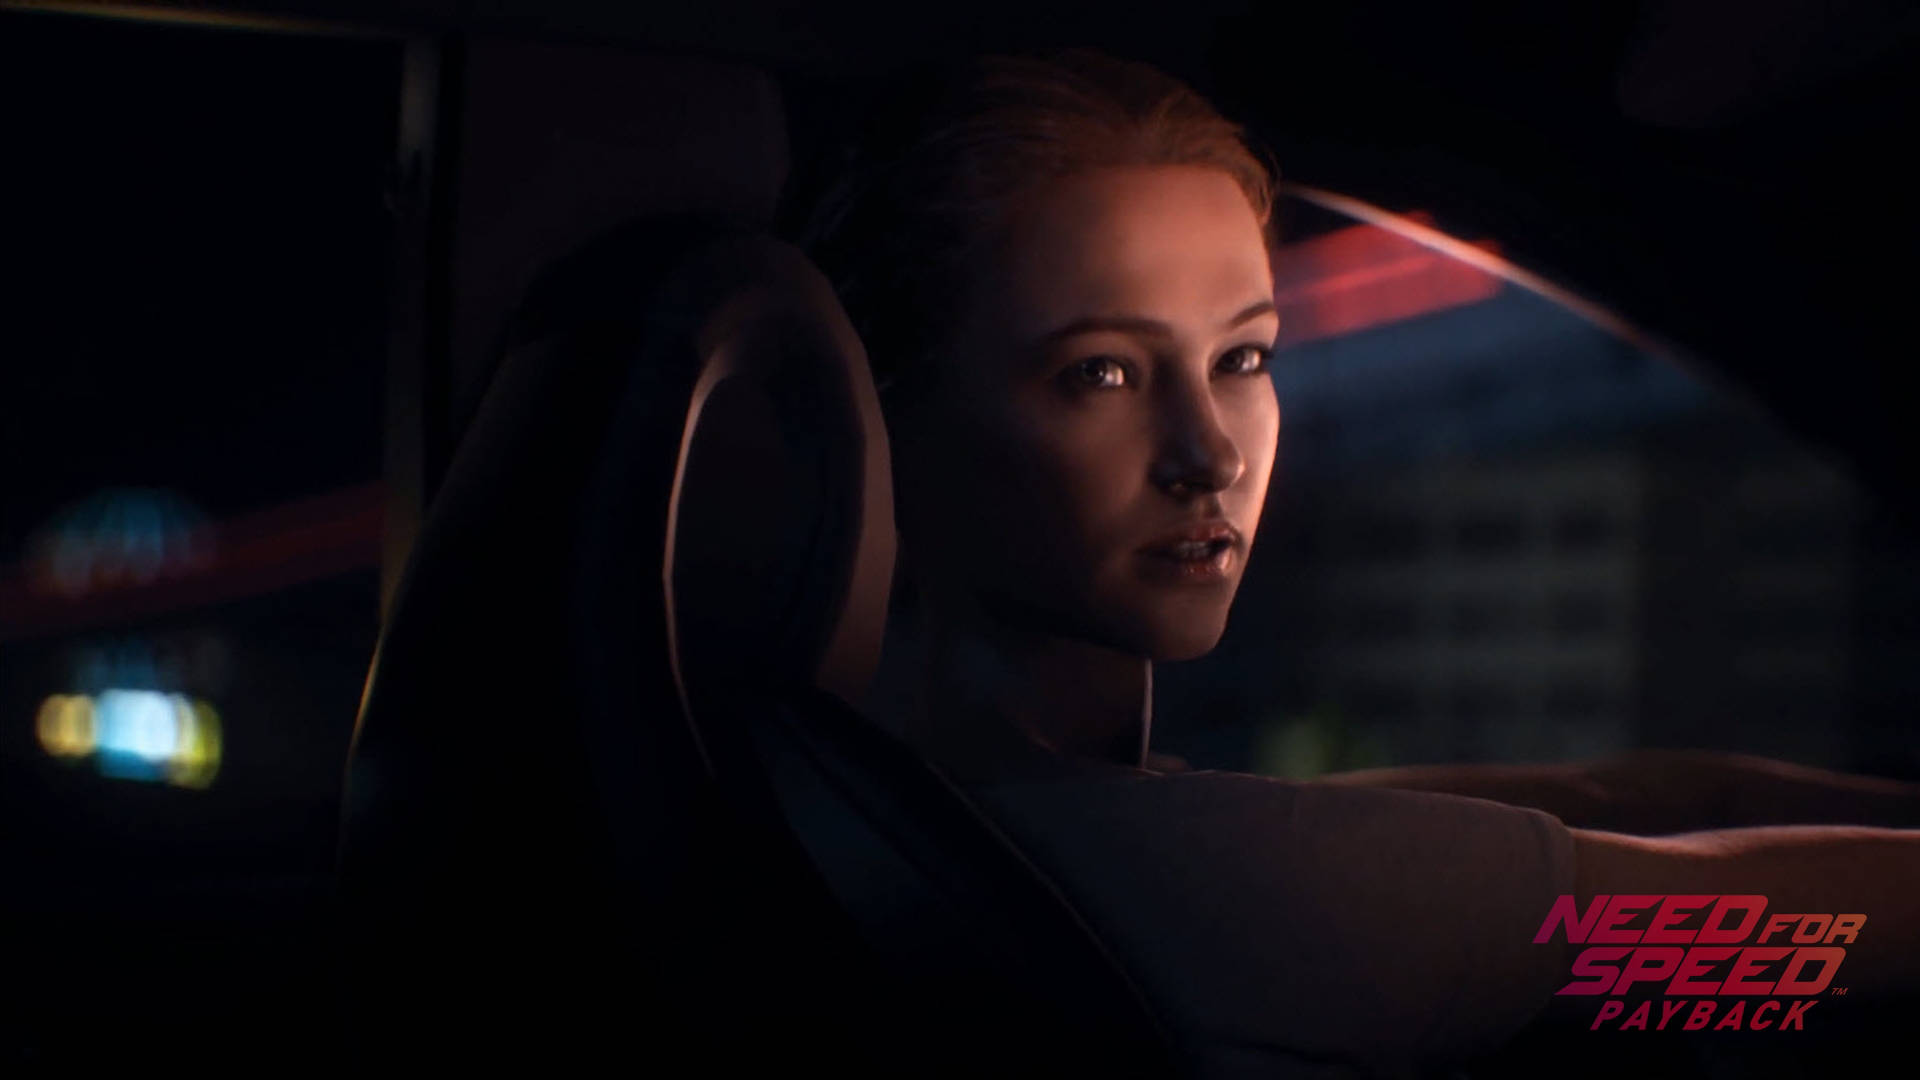 Jessica Miller In High-action Racing In Need For Speed Payback. Background